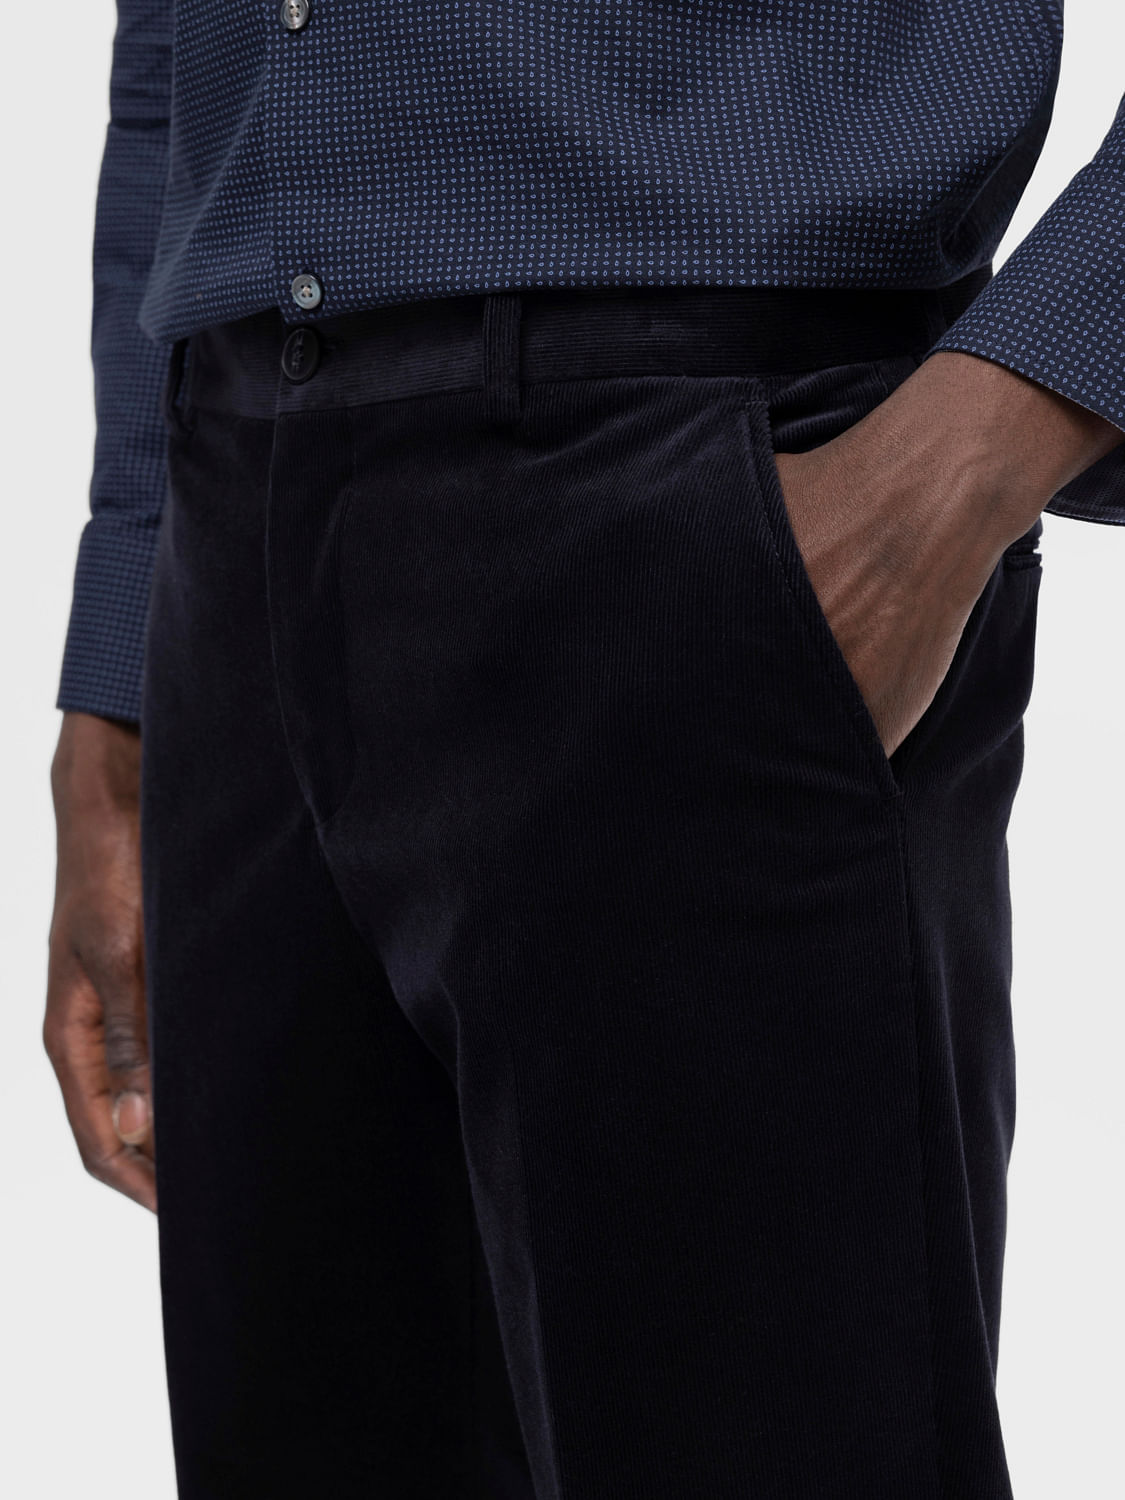 O'Connell's Plain Front 8-Wale Corduroy Trousers - Navy - Men's Clothing,  Traditional Natural shouldered clothing, preppy apparel